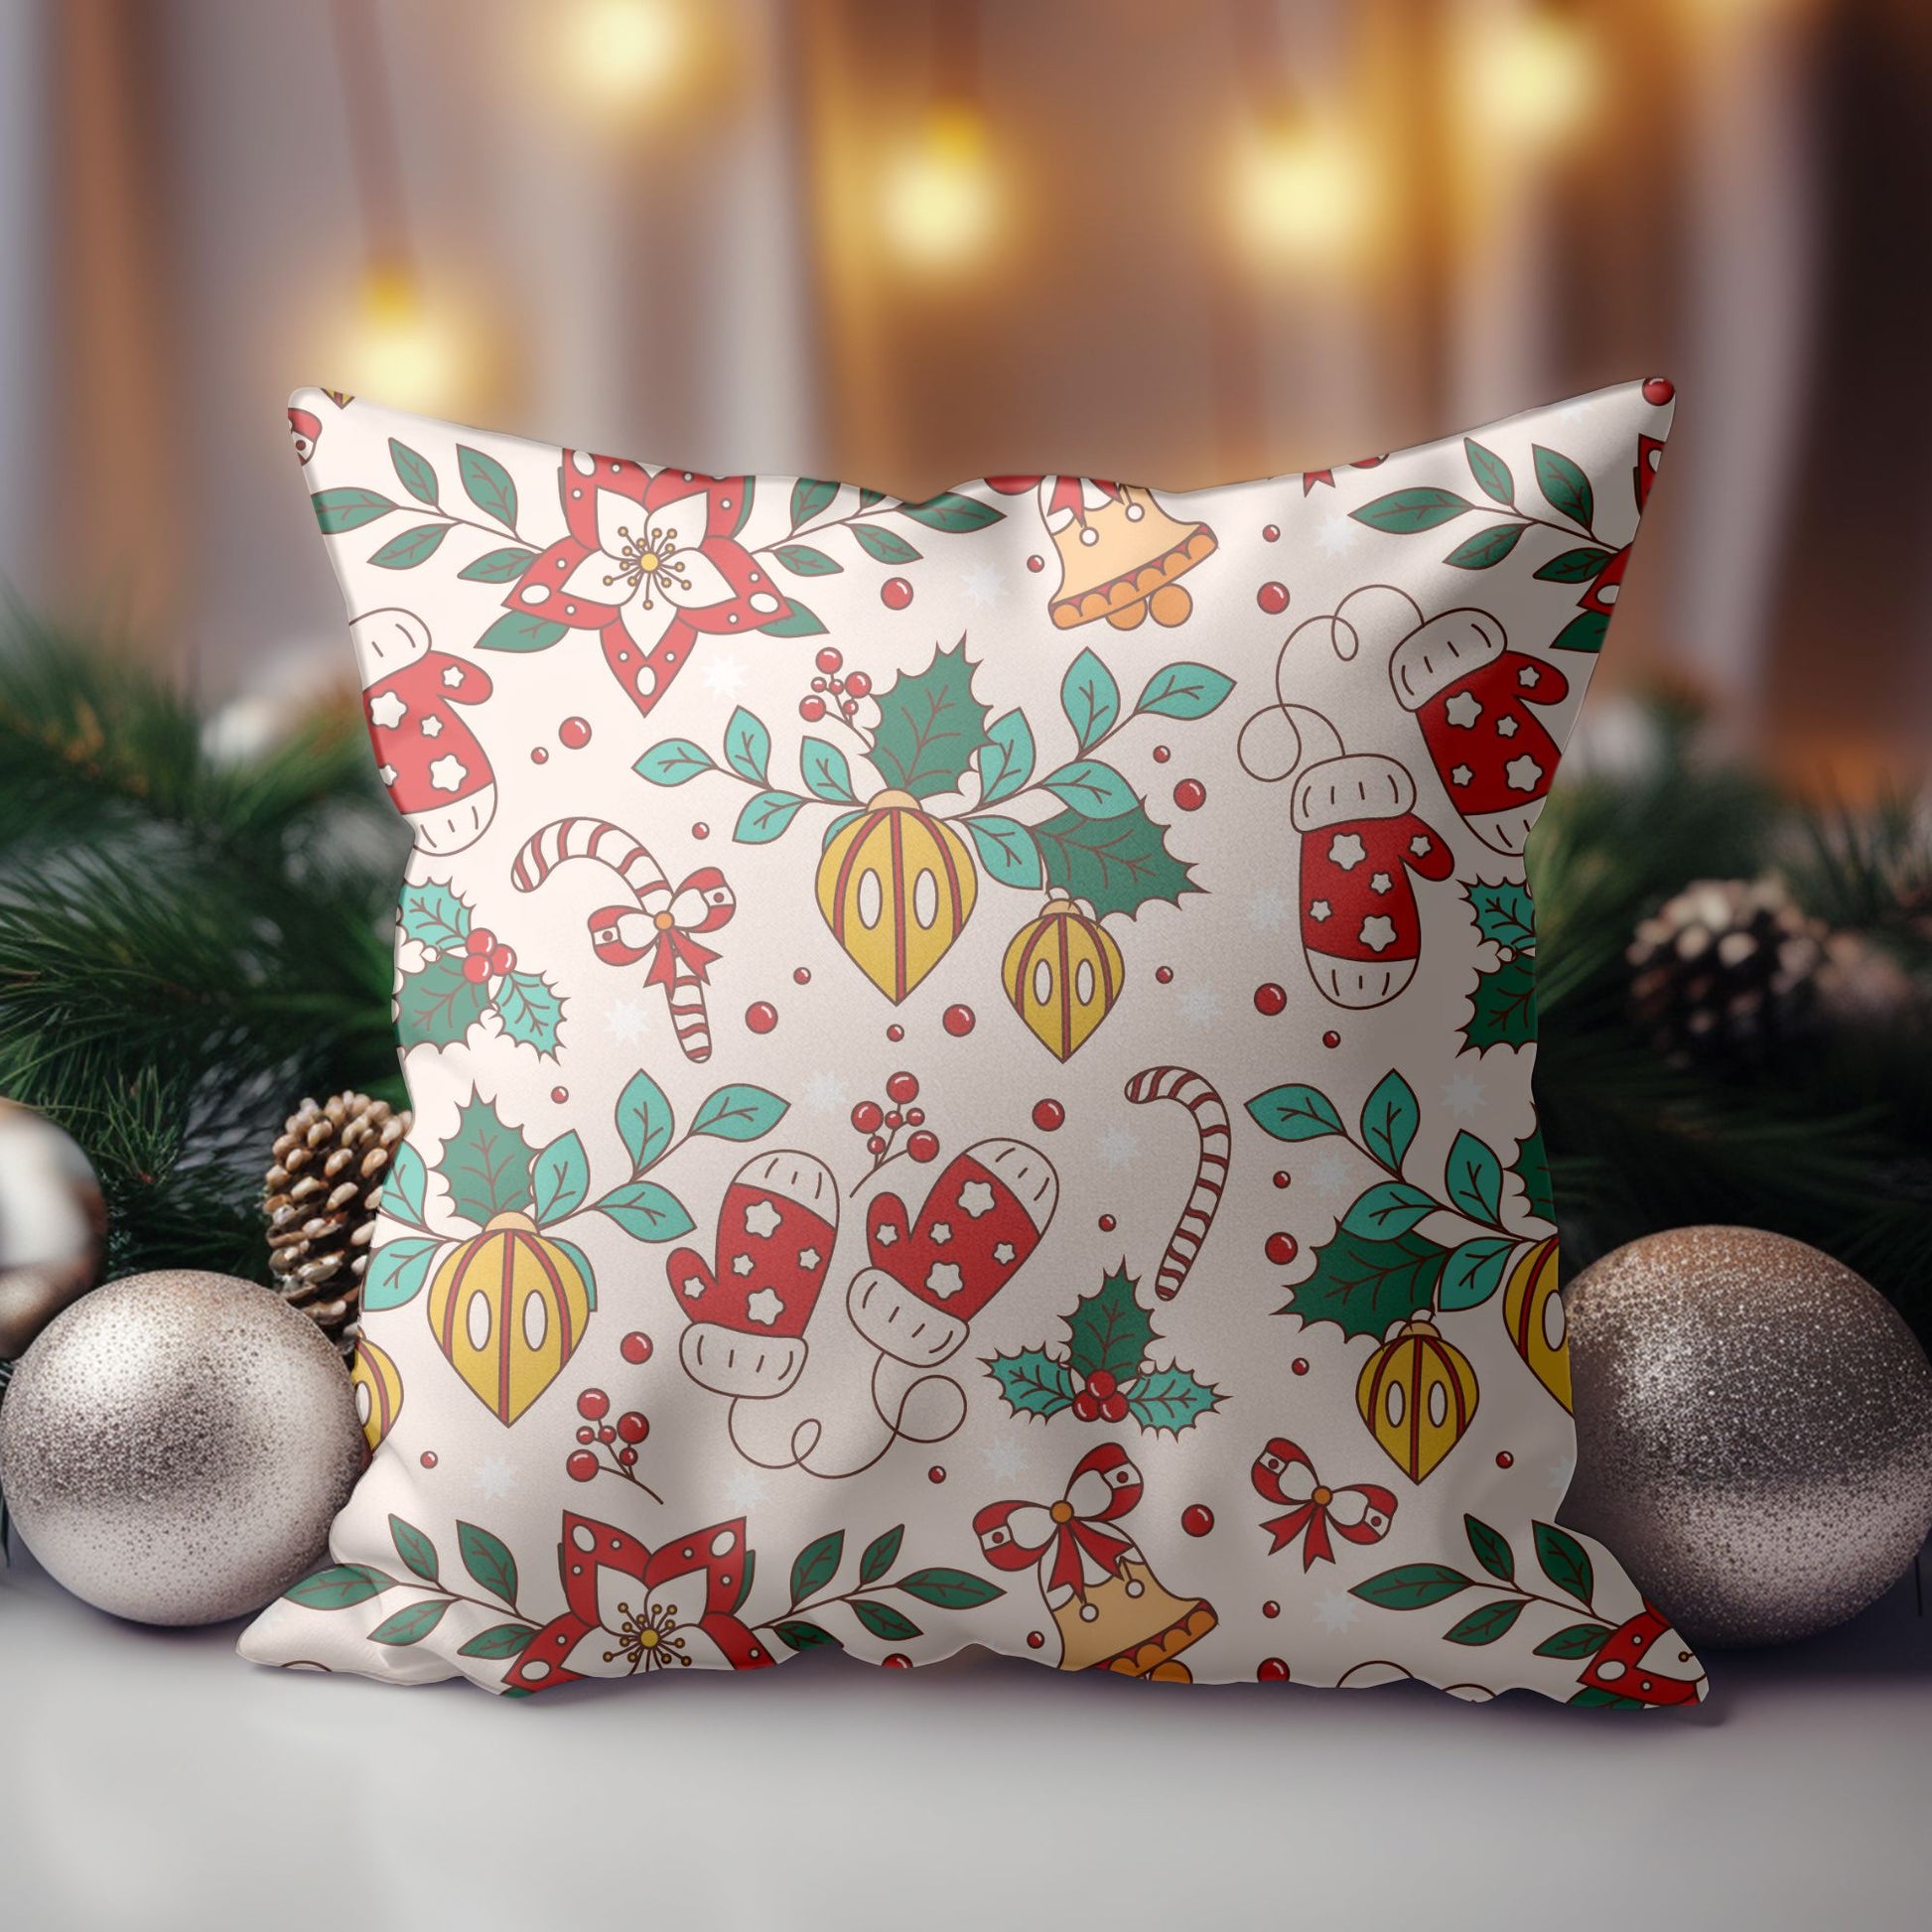 Festive Red and Green Christmas Pillow